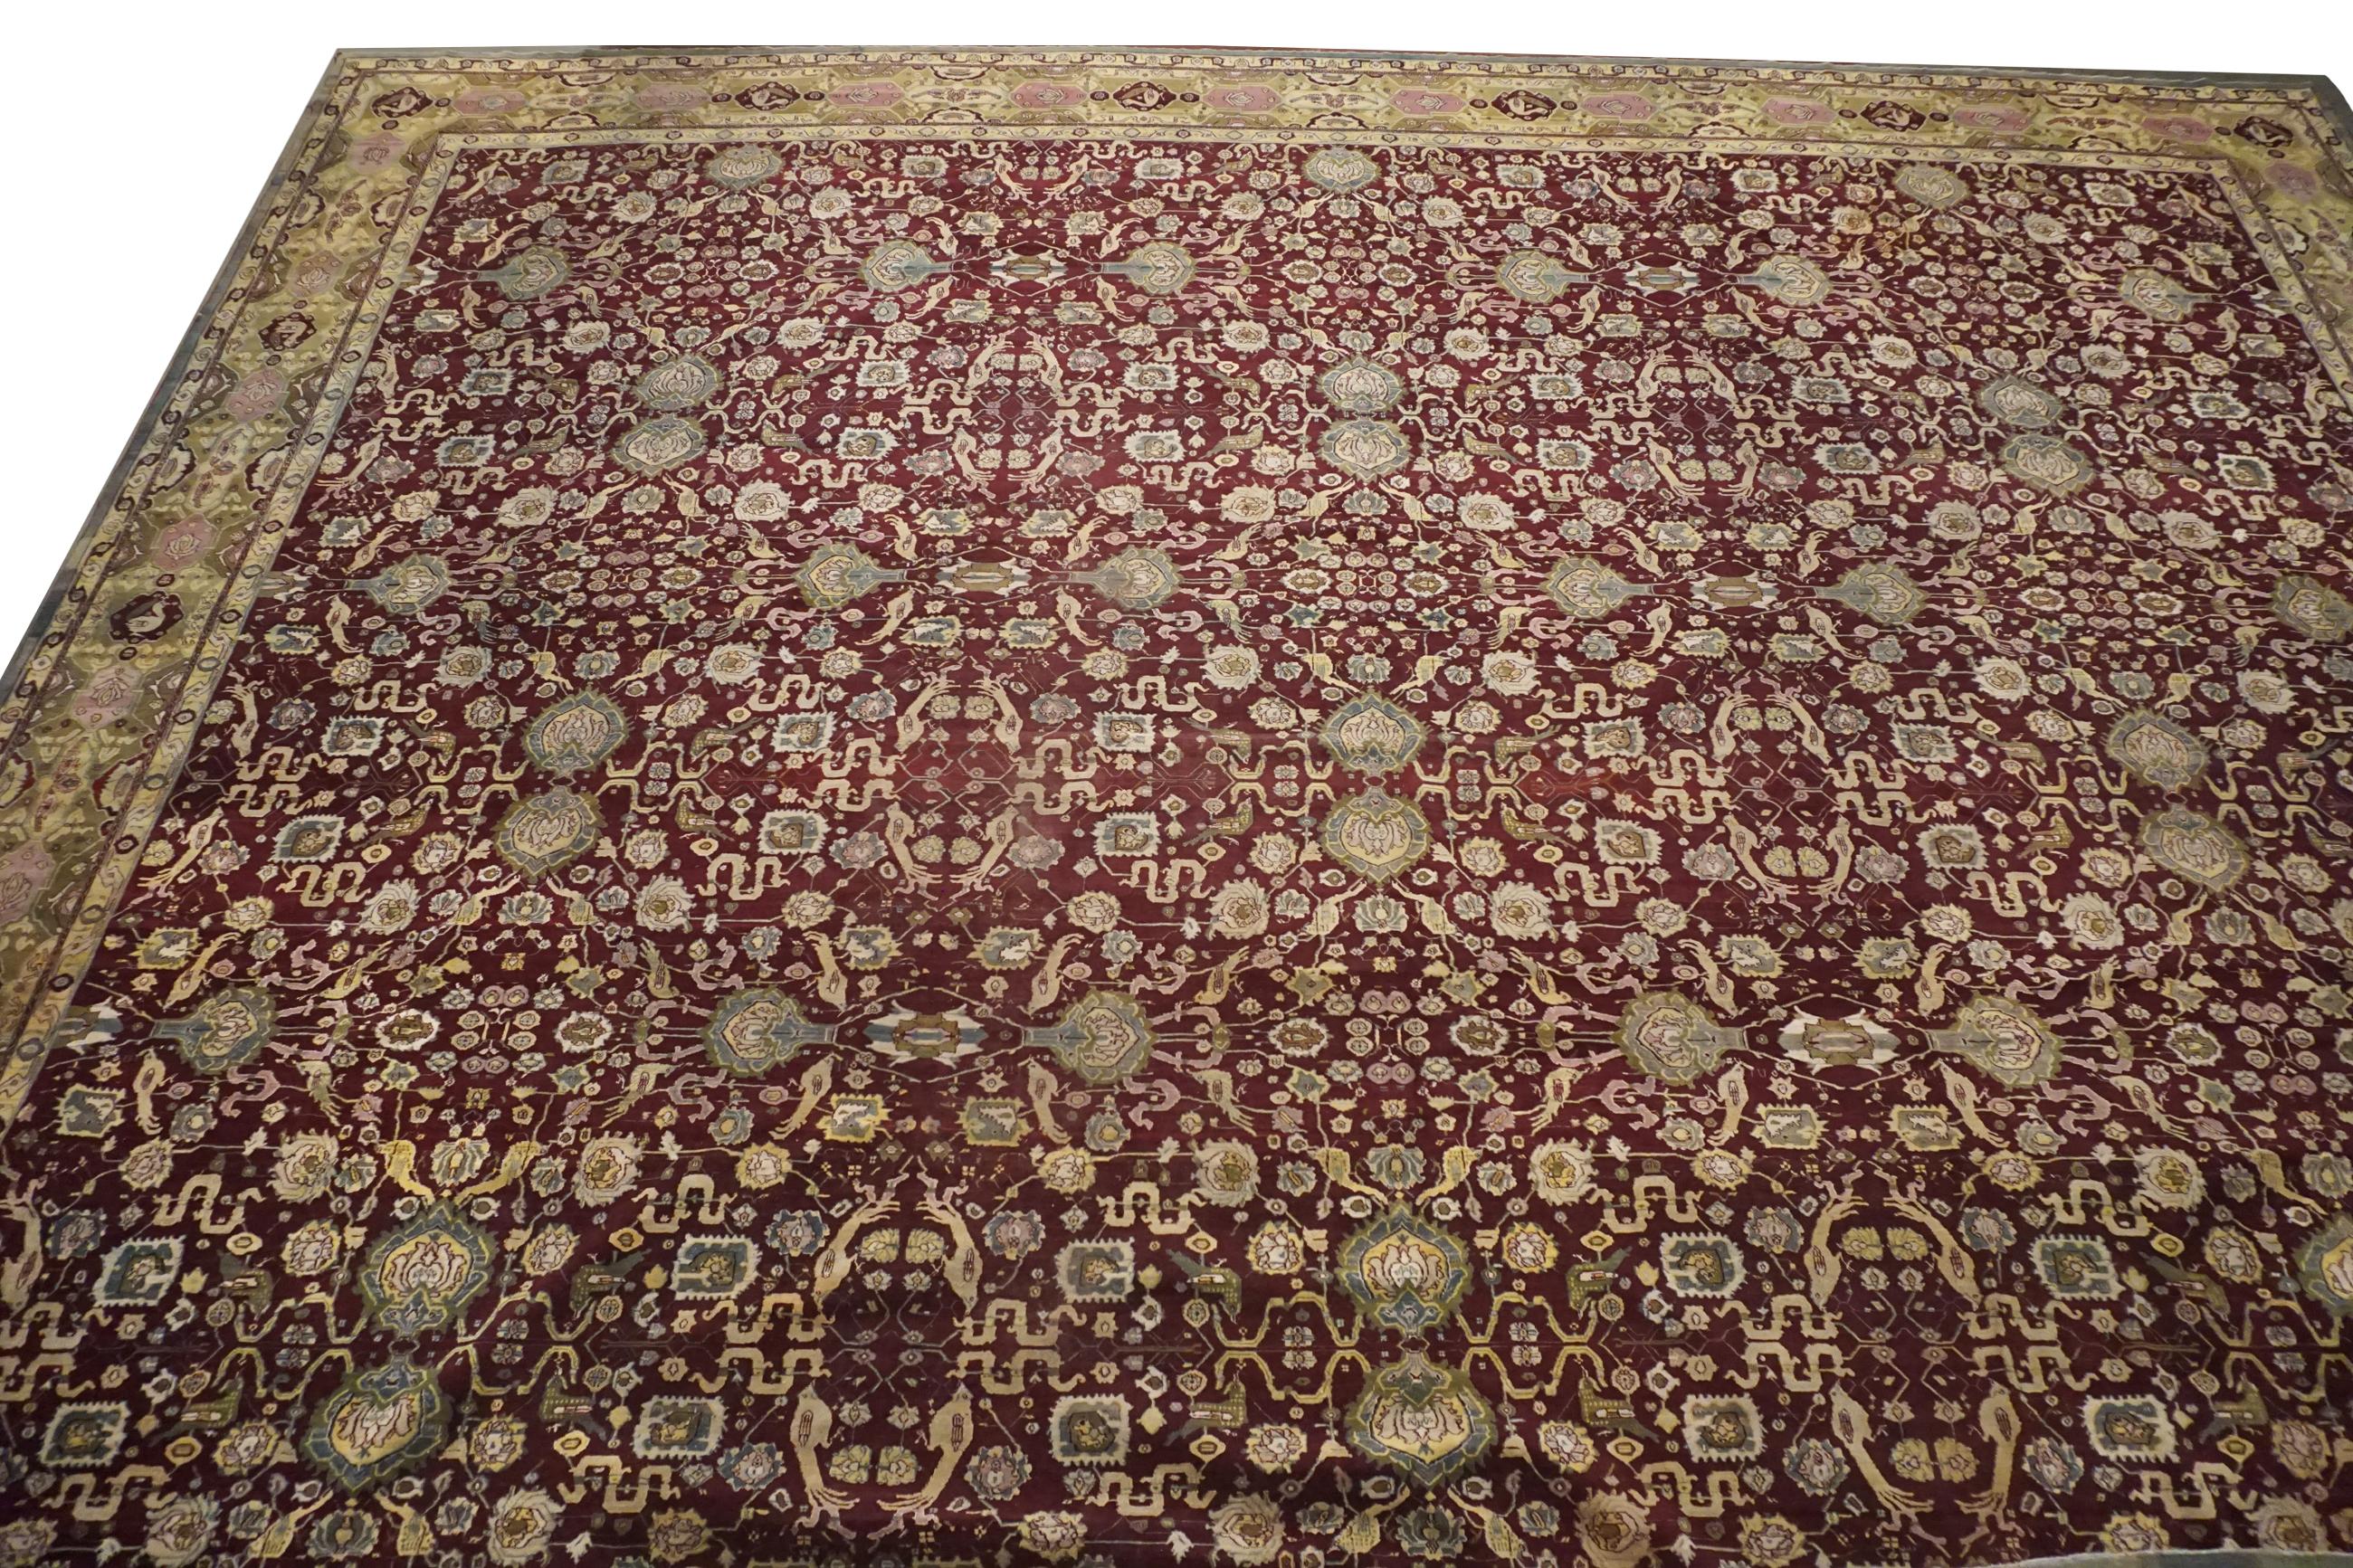 Hand-knotted wool pile on a cotton foundation.

Bird and Snake Design

circa 1890

Dimensions: 23' x 26'

Origin: India 

Condition: excellent for its age

Field color: Burgundy

Border color: yellow-green

Accent color: light-blue,